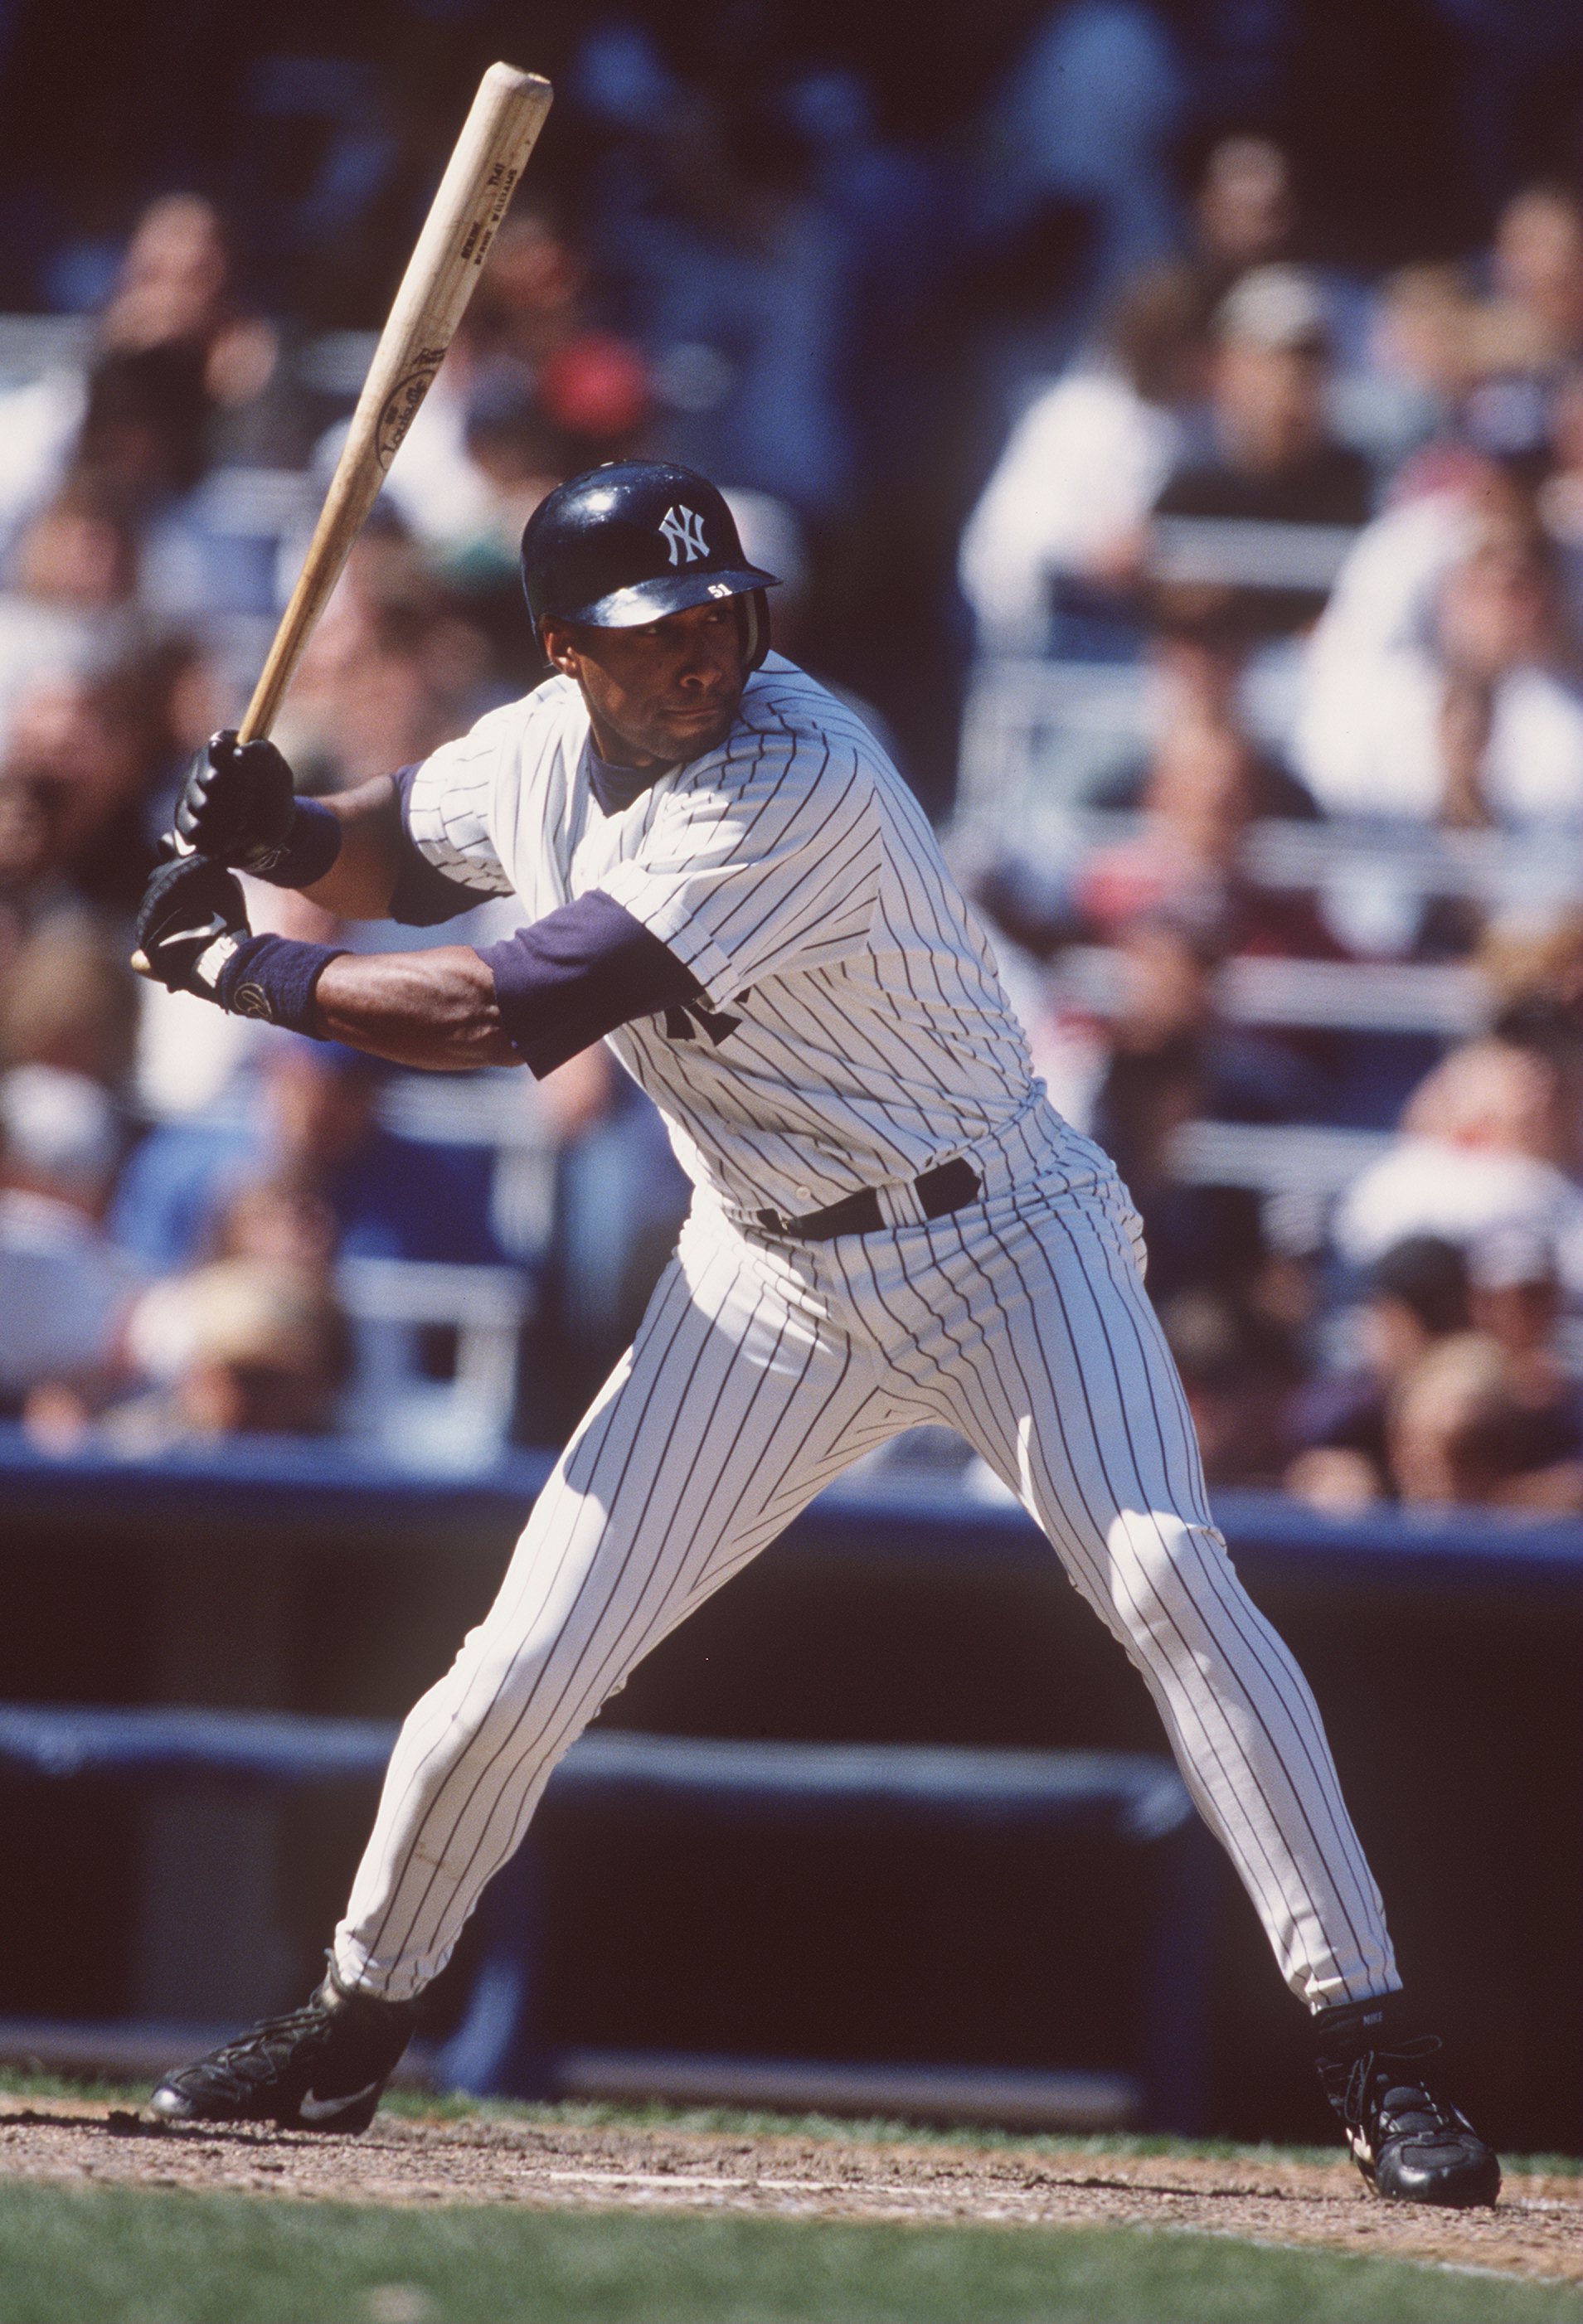 27 Apr 1996:  Outfielder Bernie Williams of the New York Yankees stares back at the mound as he awaits the ball during an at-bat in the Yankees' 4-3 loss to the Minnesota Twins at Yankee Stadium in New York, New York.   Mandatory Credit: Al Bello/ALLSPORT